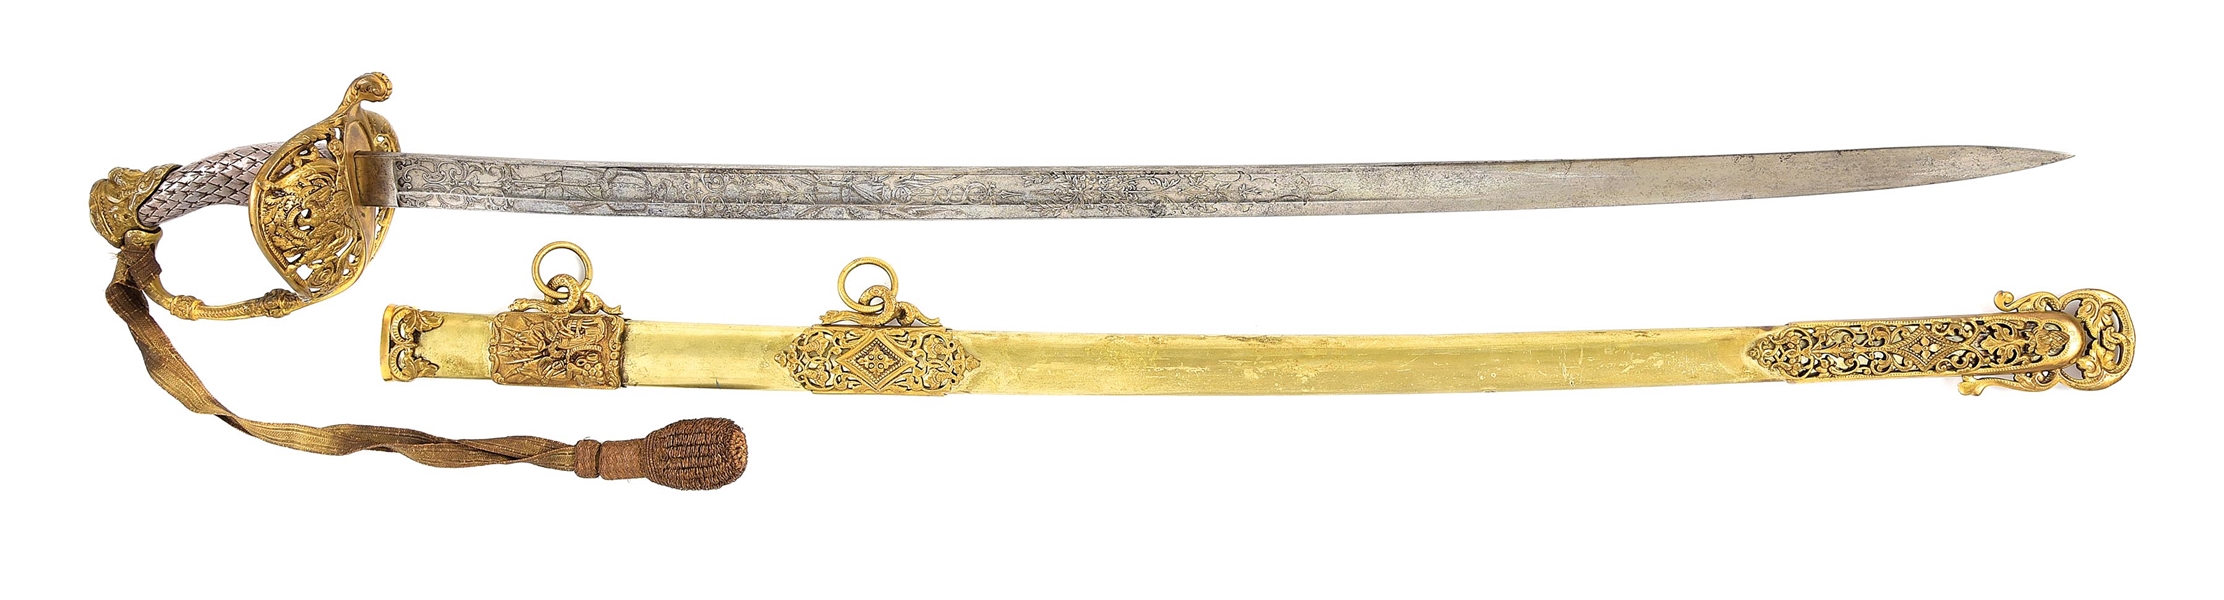 EXCEPTIONAL TIFFANY & CO PRESENTATION GRADE 1850 OFFICER’S SWORD PRESENTED TO CAPTAIN FREDERICK MEMMERT, CAPTURED AT WINCHESTER, PRISONER AT LIBBY, TESTIFIED AT THE TRIAL OF THE LINCOLN CONSPIRATORS.